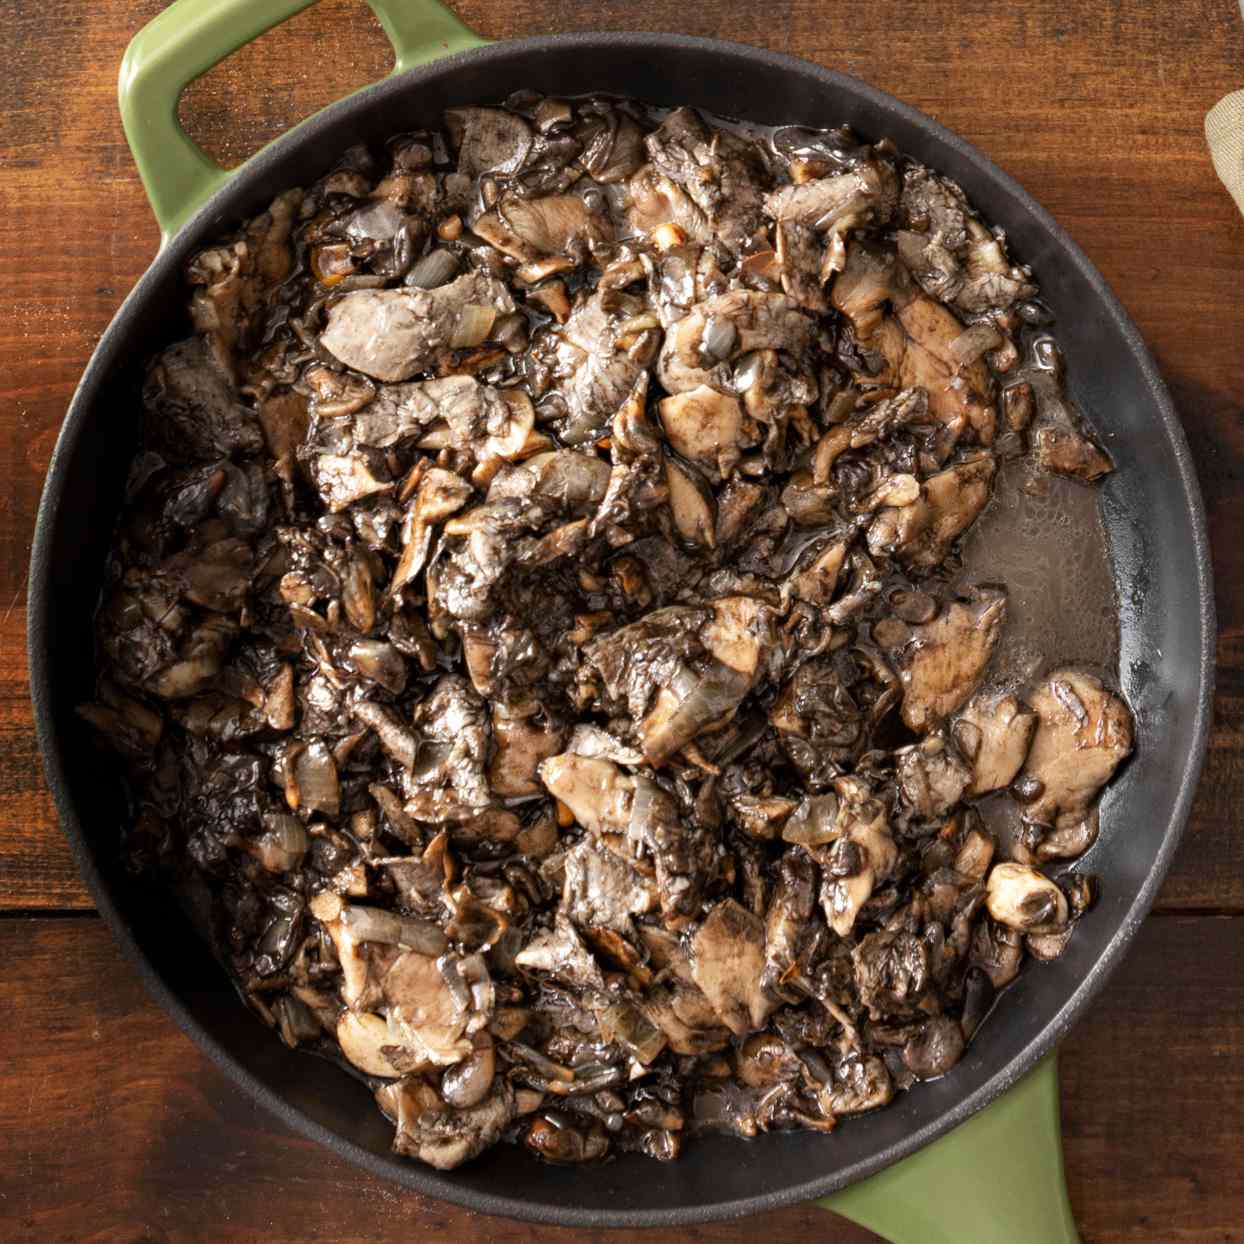 <p>Tamales often feature meaty fillings, but this earthy recipe from chef Jorge Guzmán of Petite León in Minneapolis is vegetarian. The dark color comes from huitlacoche, a fungus that grows on corn and has been used in Mexican cooking for centuries. (You can buy it canned online or at some Mexican markets.)</p>
                          <p>Related: Chef Jorge Guzmán's Step-by-Step Guide to Making Tamales</p>
                          